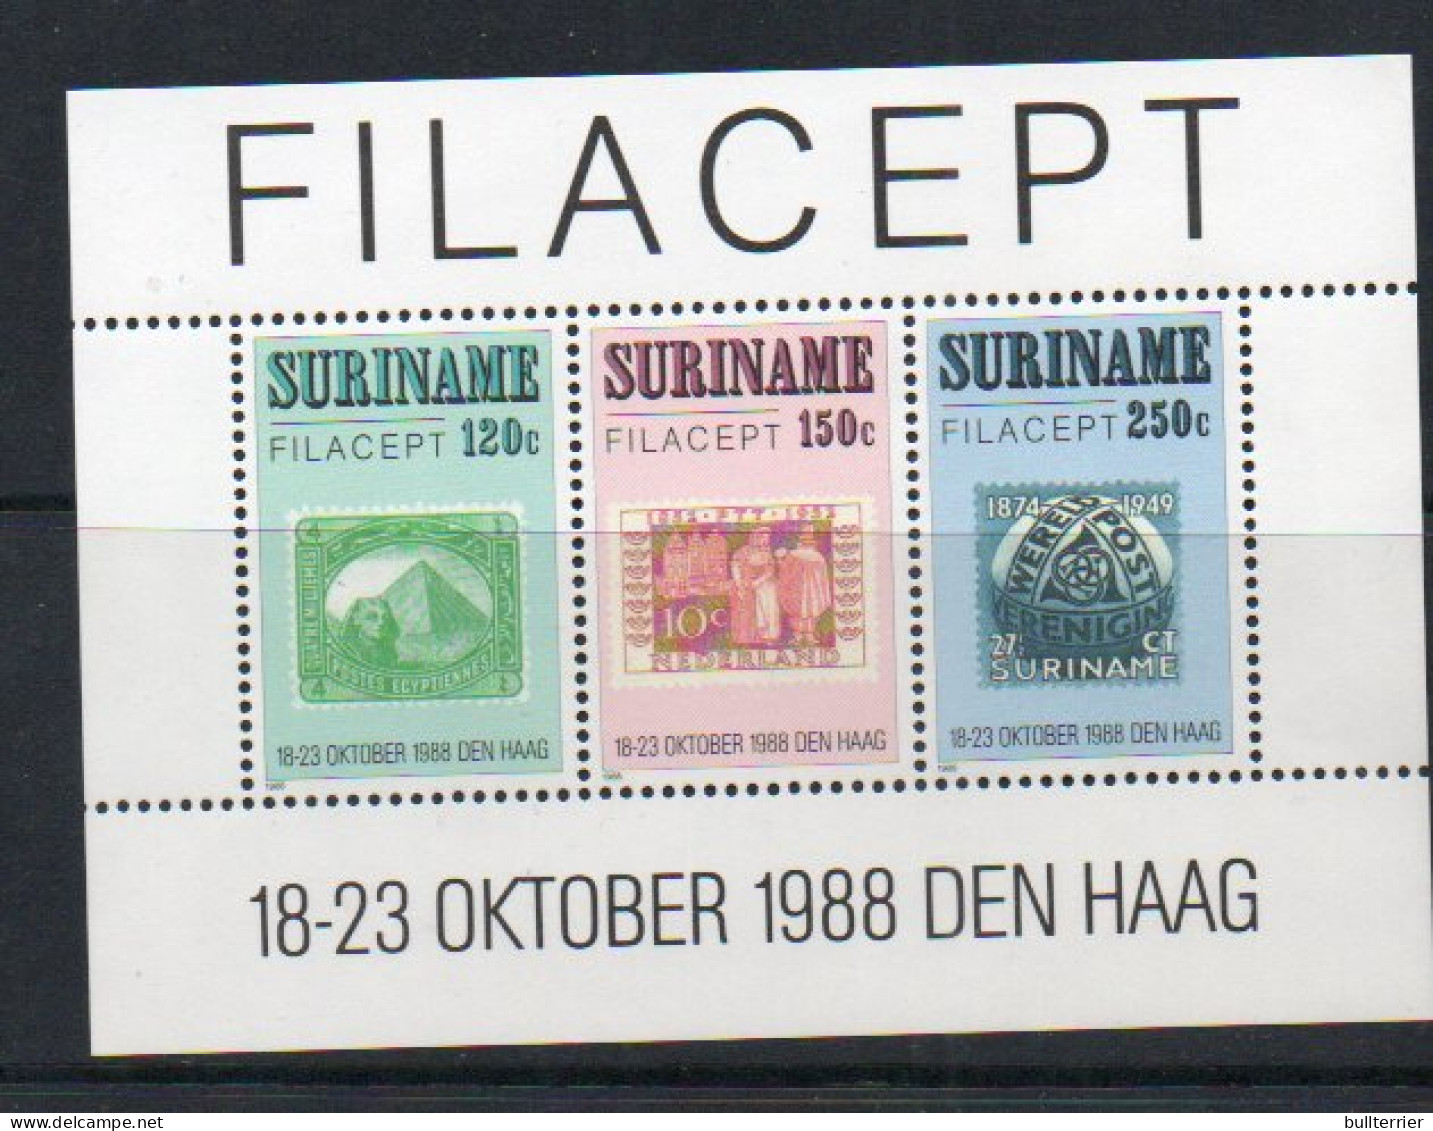 STAMPS ON STAMPS - SURINAM - 1988- FILACEPT SOUVENIR   MINT NEVER HINGED, SG CAT £18 - Sellos Sobre Sellos